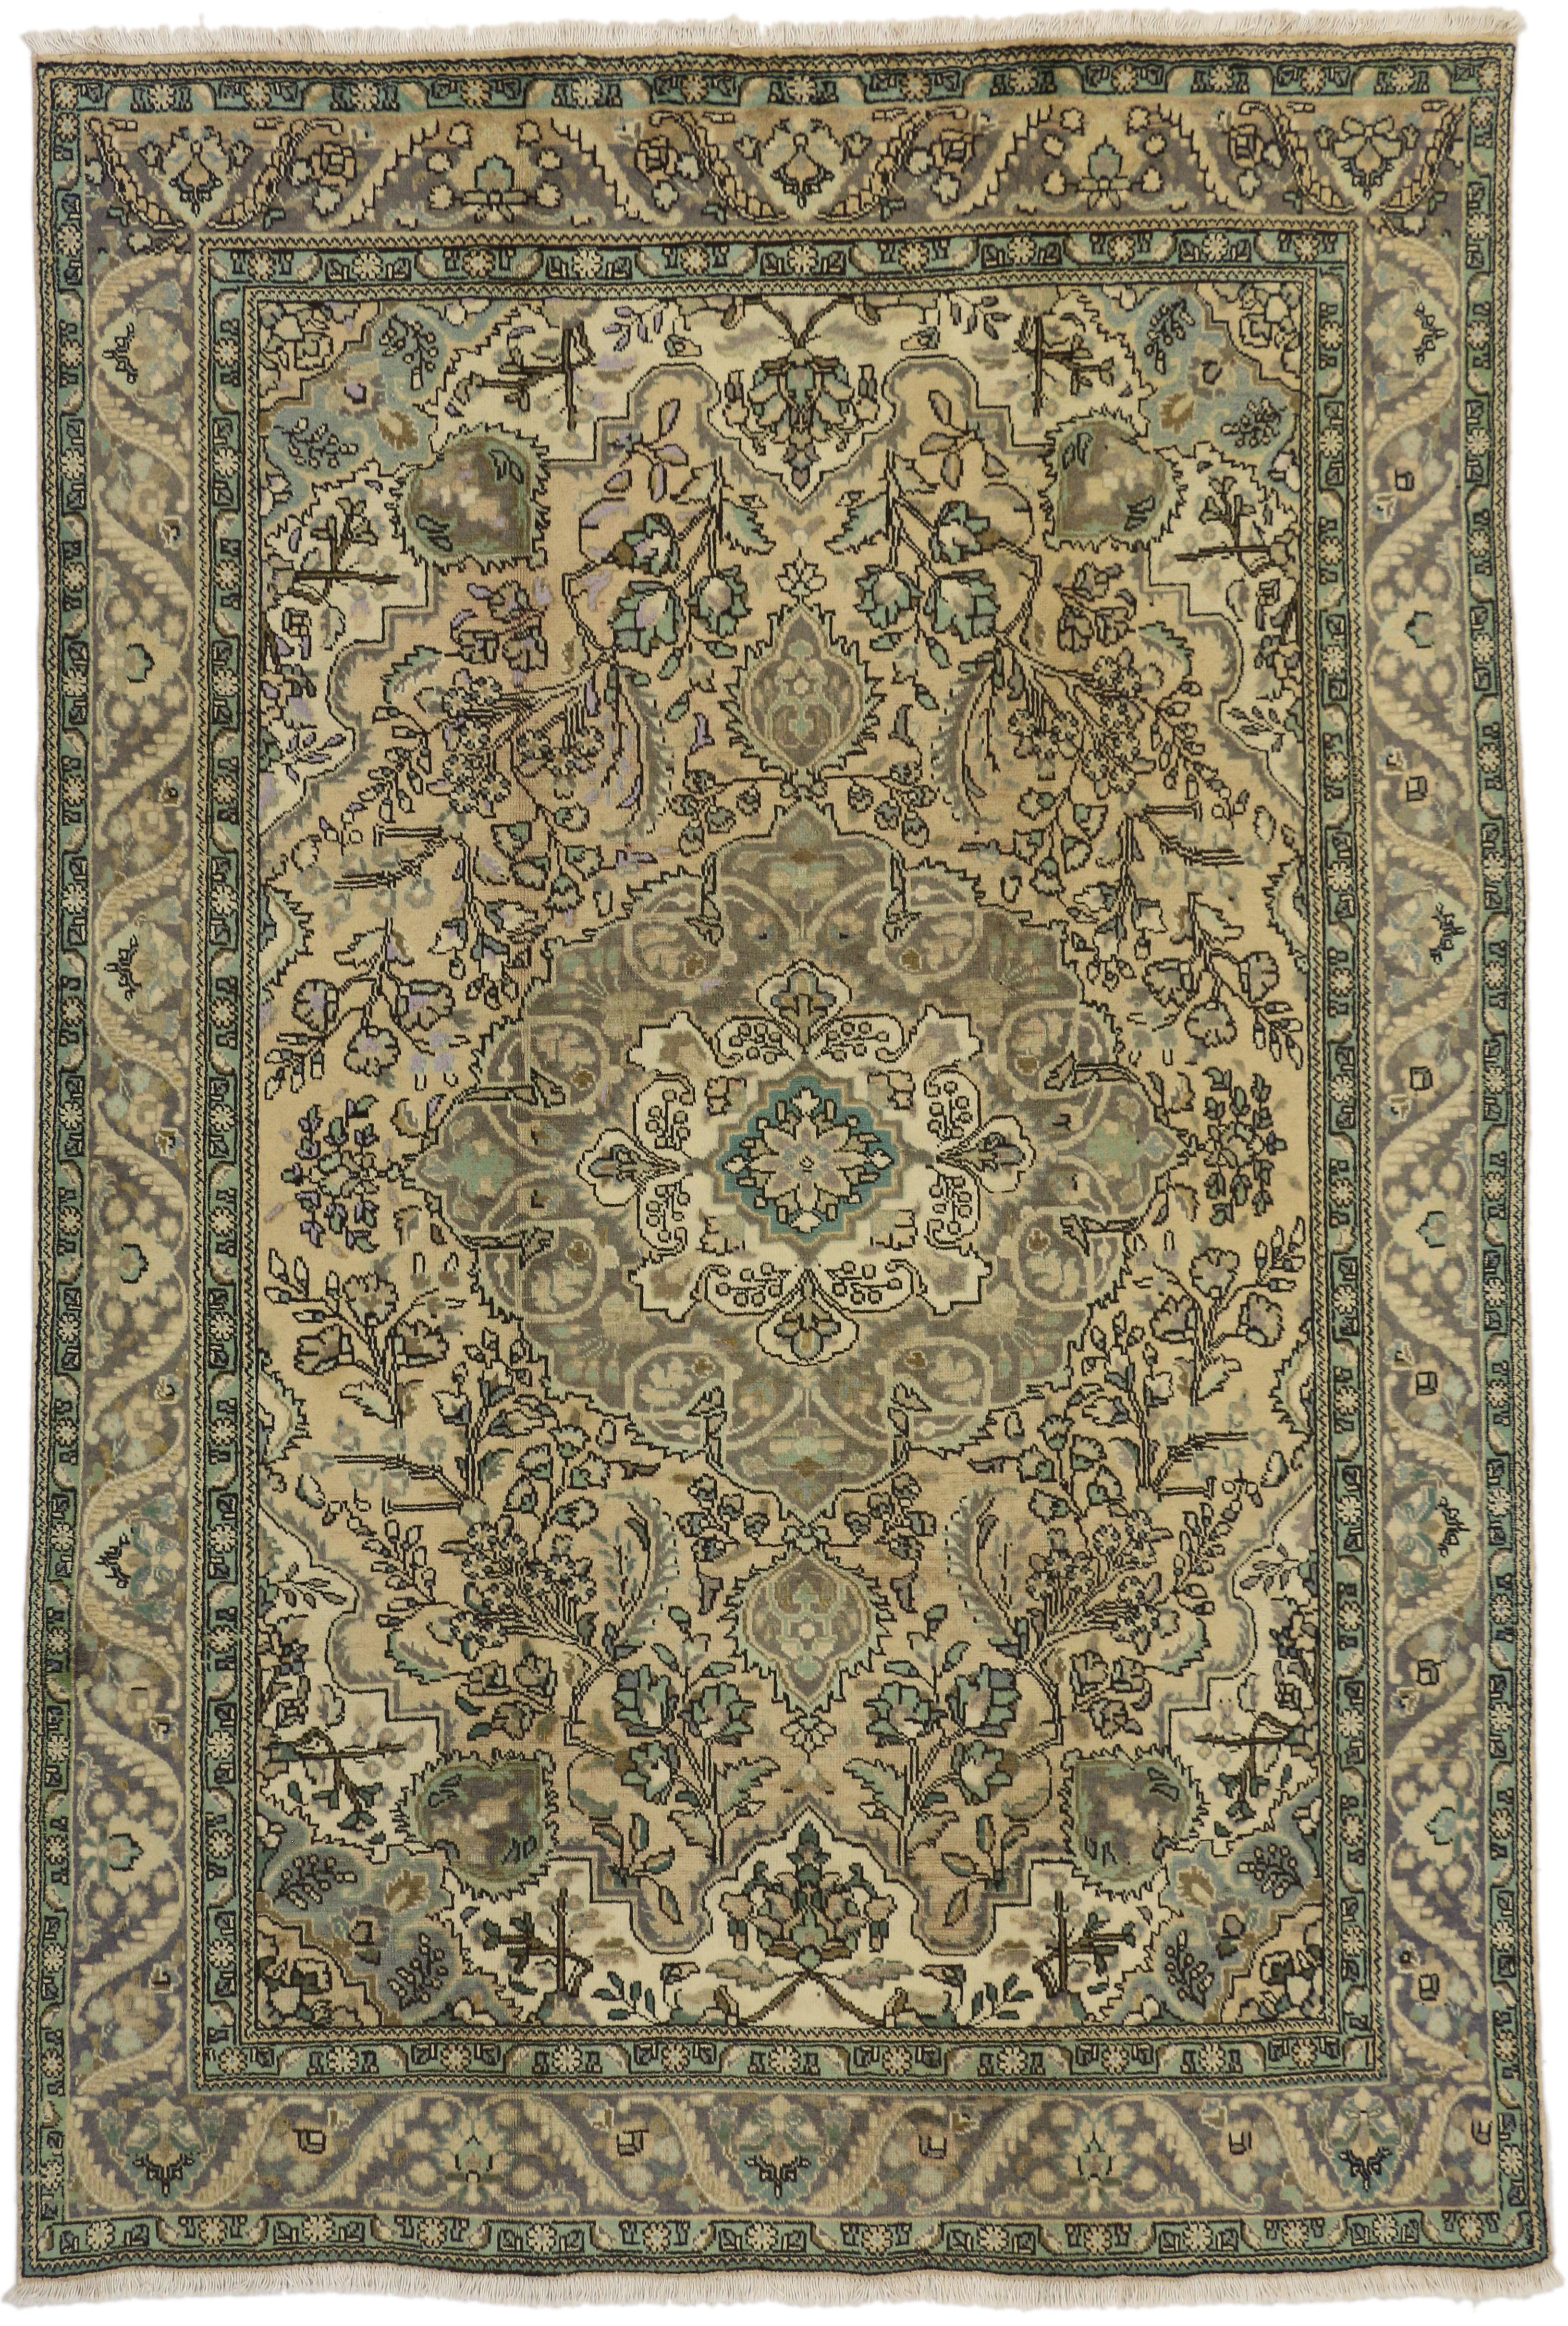 76453, Vintage Persian Tabriz Area Rug with French Provincial Style. This hand-knotted wool vintage Persian Tabriz area rug is a prime example of the skilled weavers of Tabriz. The Persian Tabriz rug is rendered in subtle, pastel hues and features a